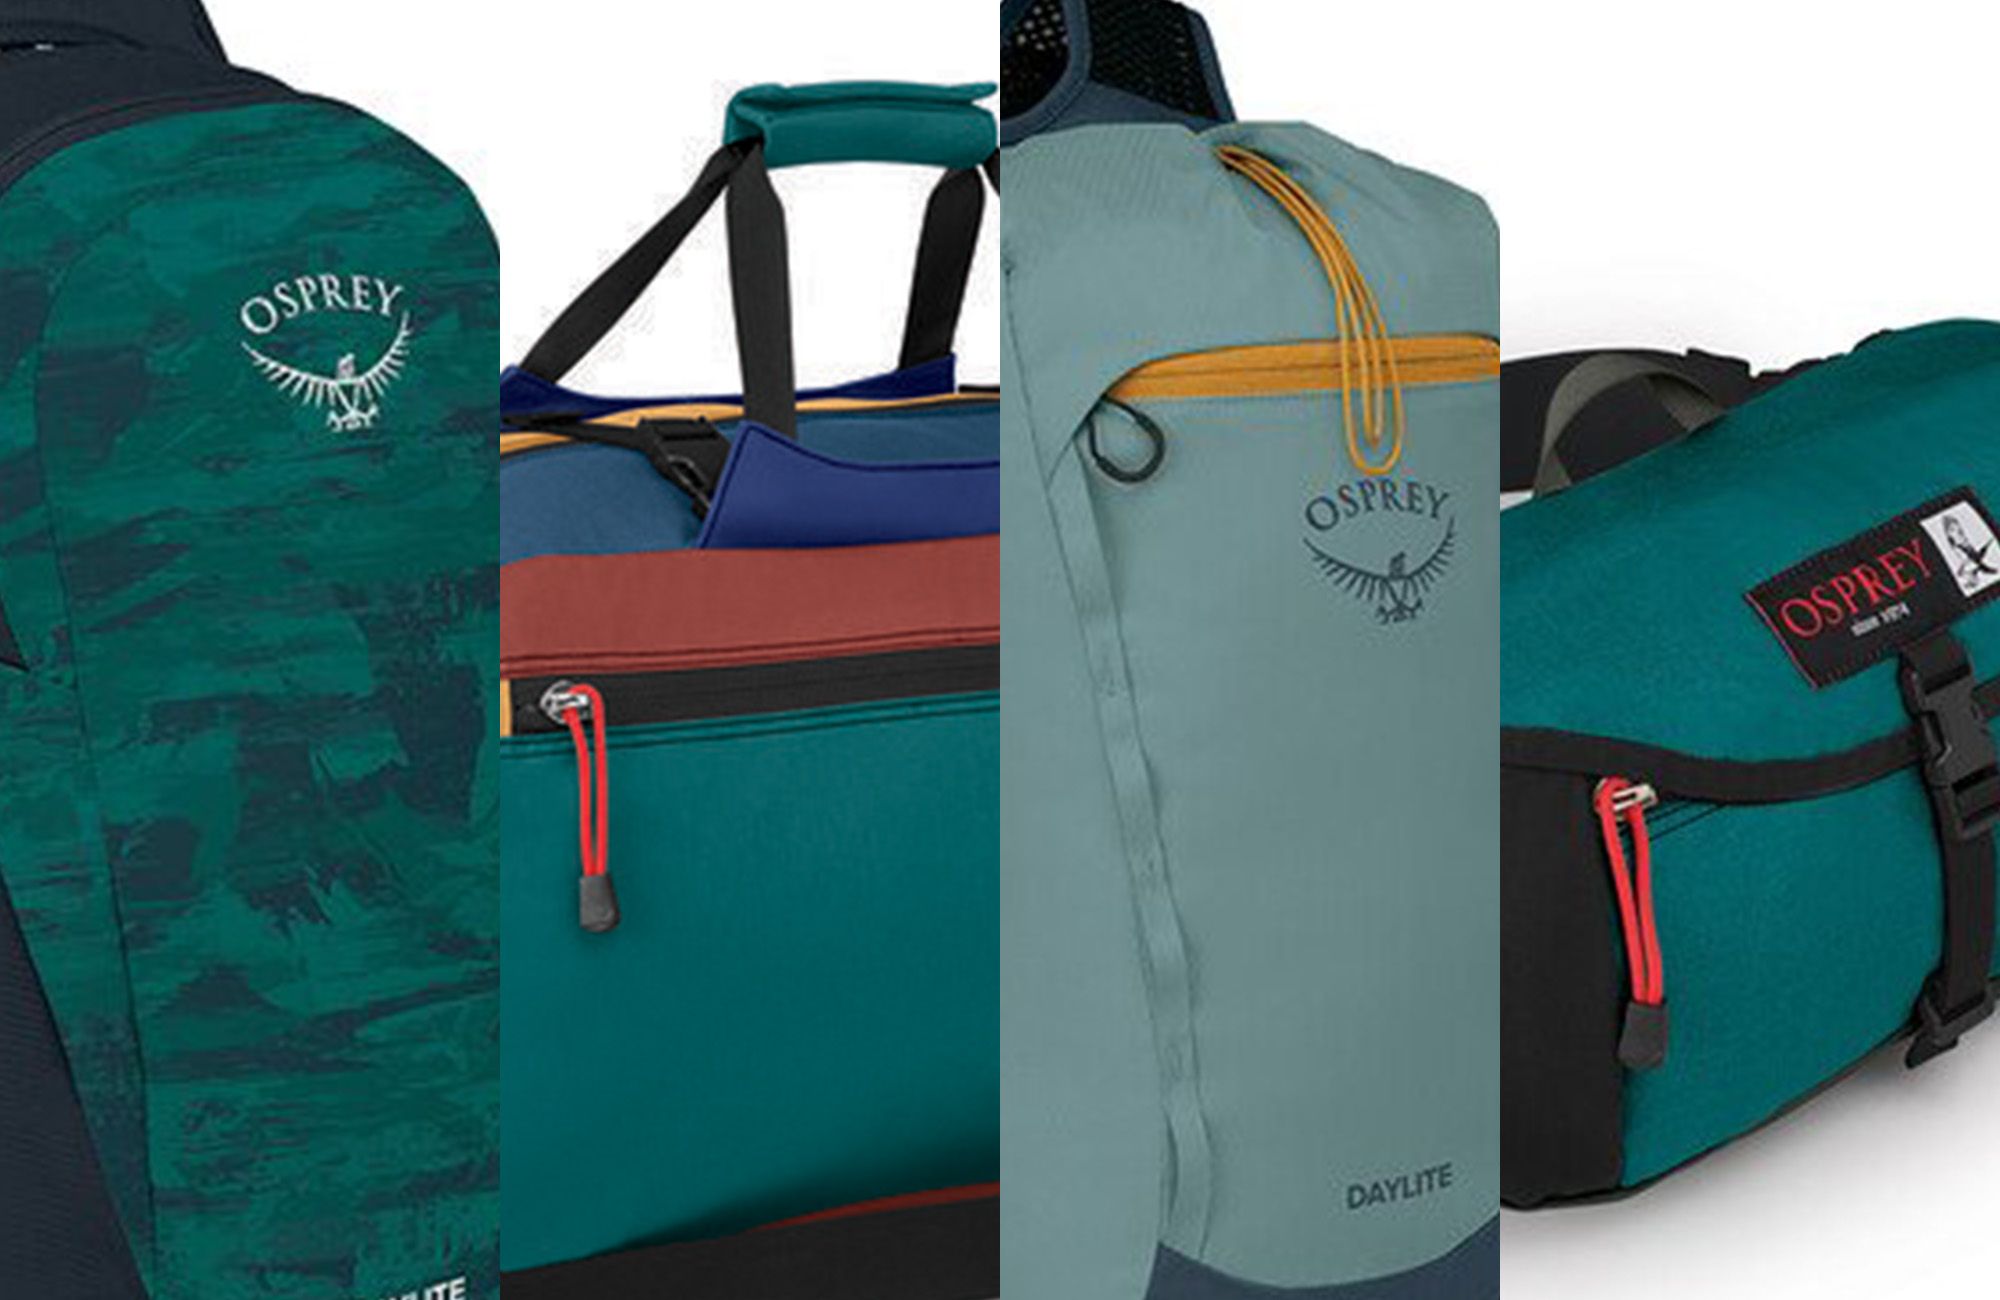 Pack in more camping fun with Osprey’s End of Summer sale